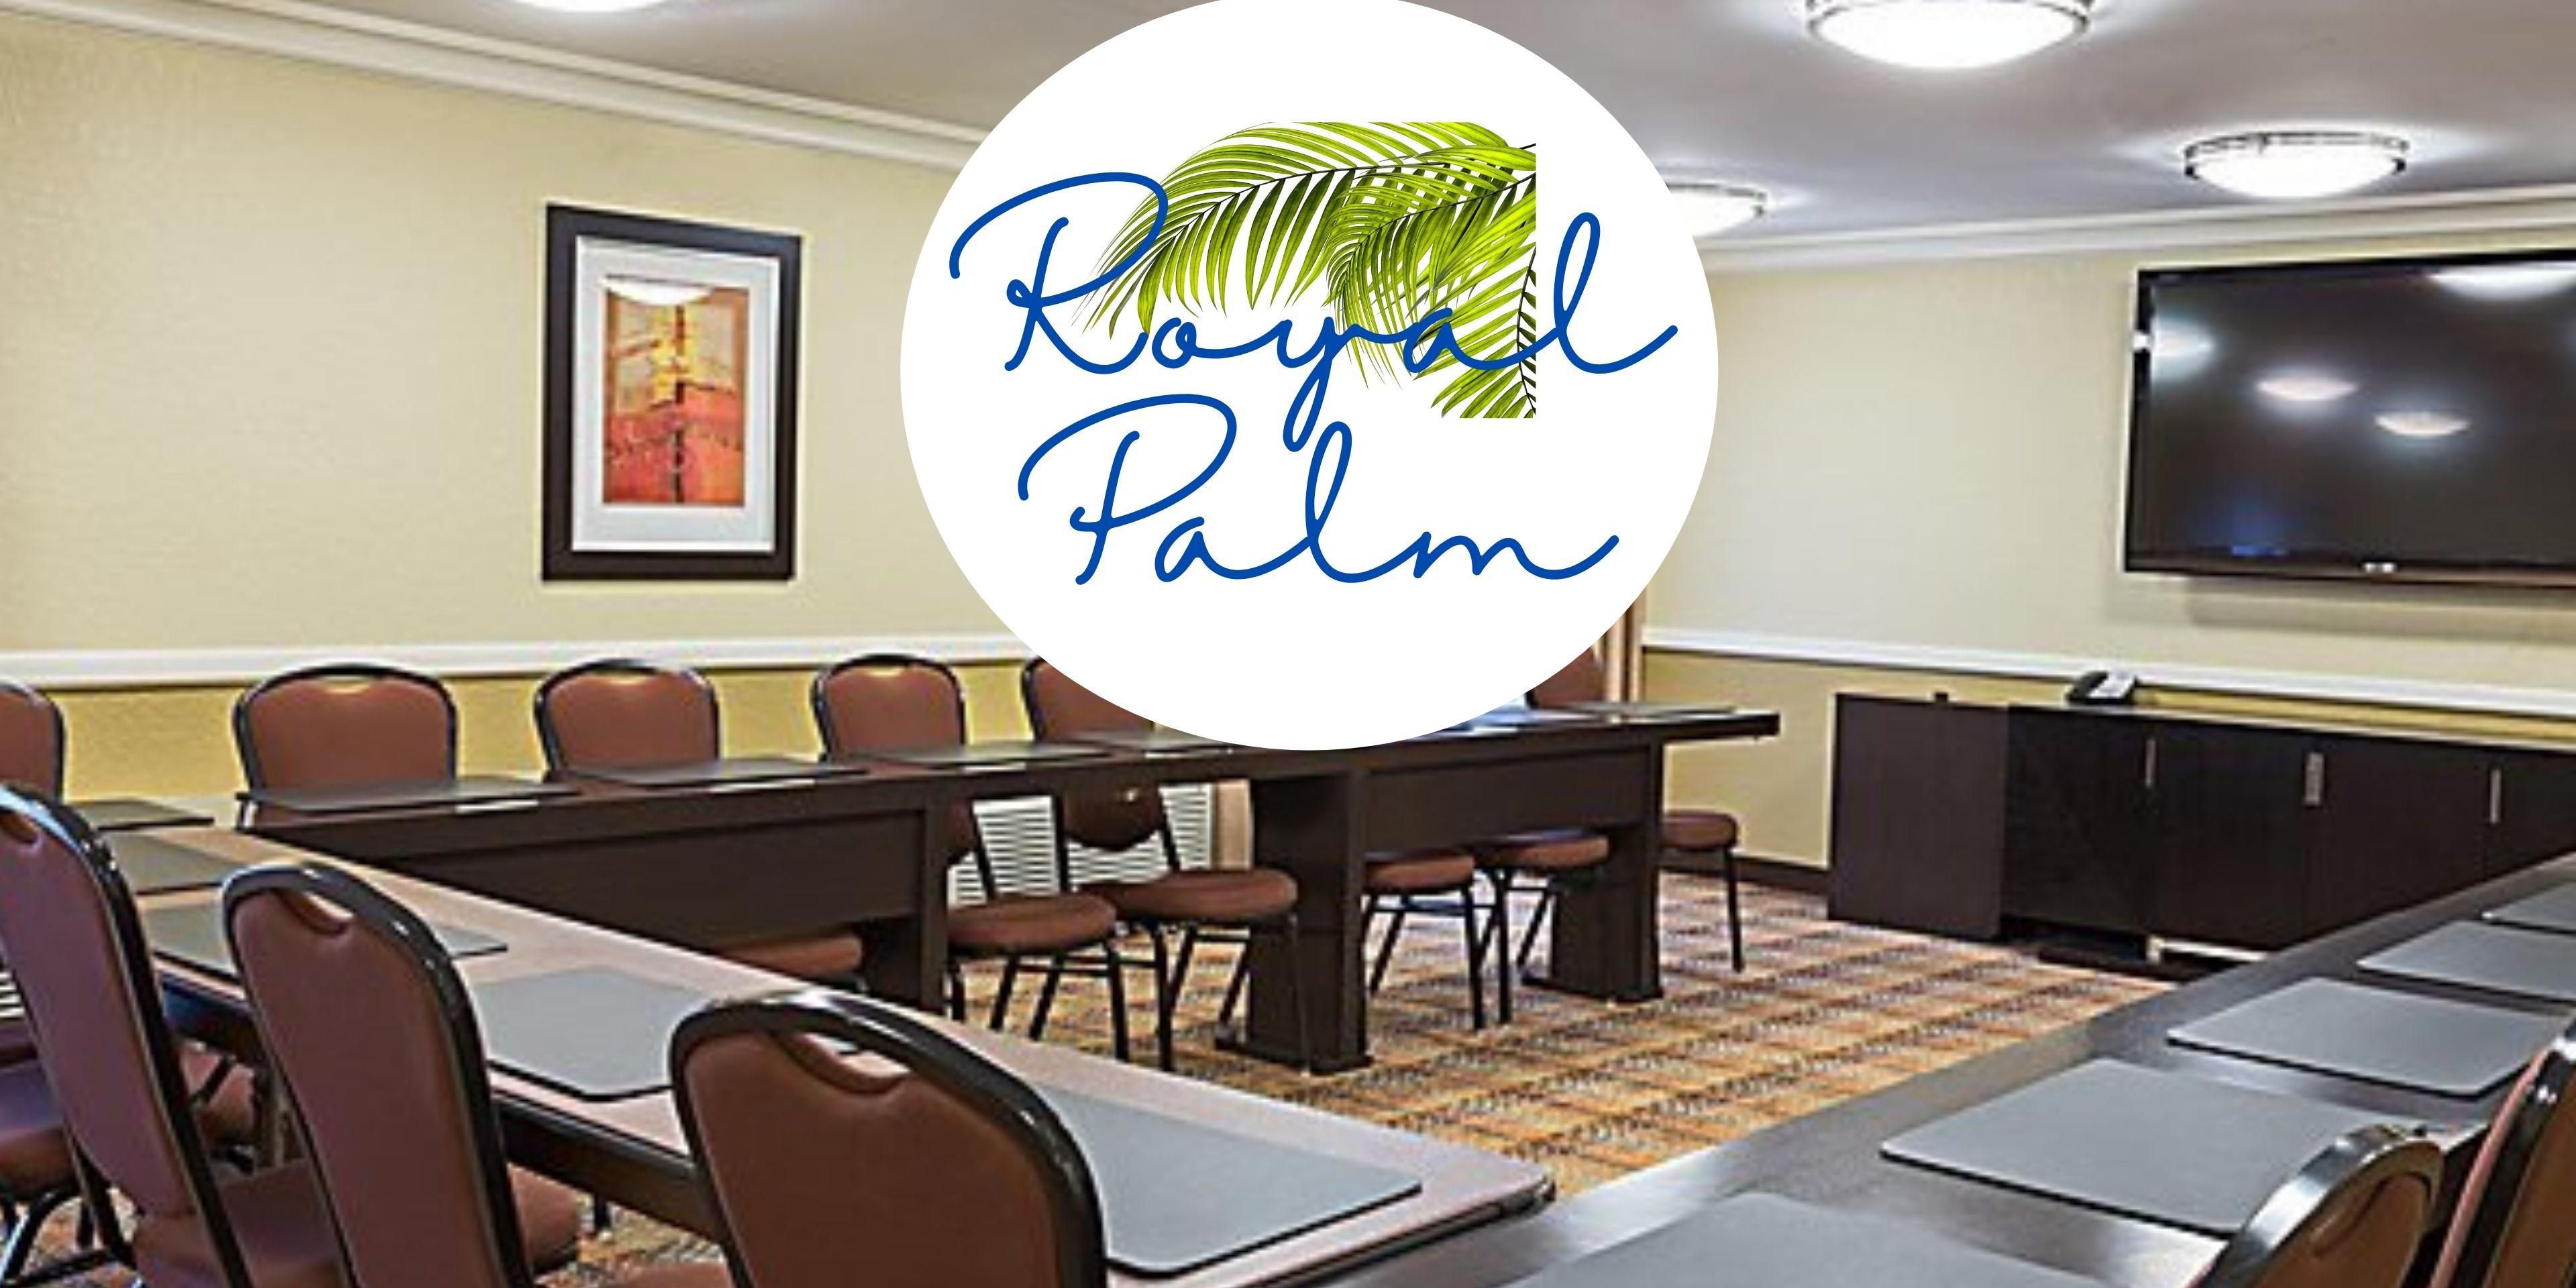 On the 1st floor, the Royal Palm Room has a “Let’s Do This” feel.  As your walking into the pre-set meeting room, you and your guest will be ready to get down to business.  Professional training, workshops, seminars, hiring, educational classes can be here. 
Don’t forget IHG®  Business Rewards members earn 3 Points per $1 on qualifying events. 